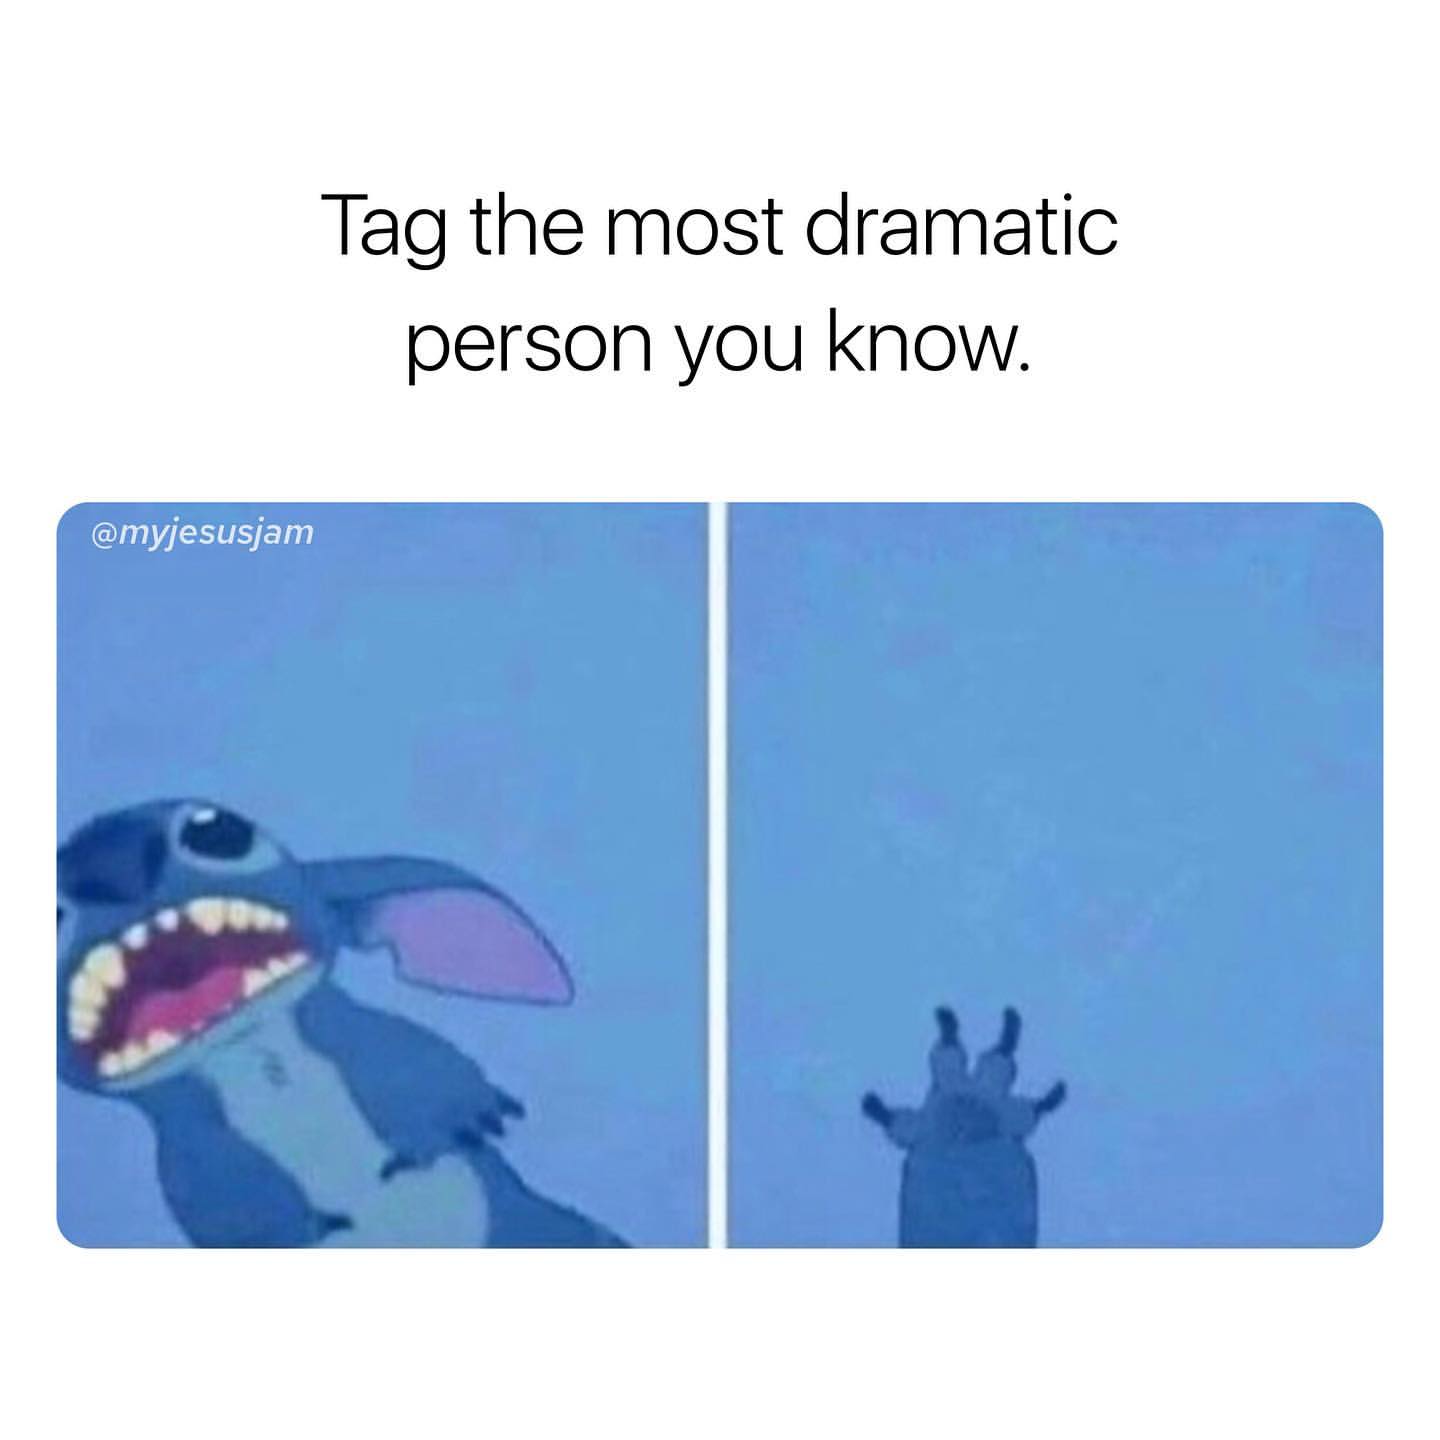 Tag the most dramatic person you know.